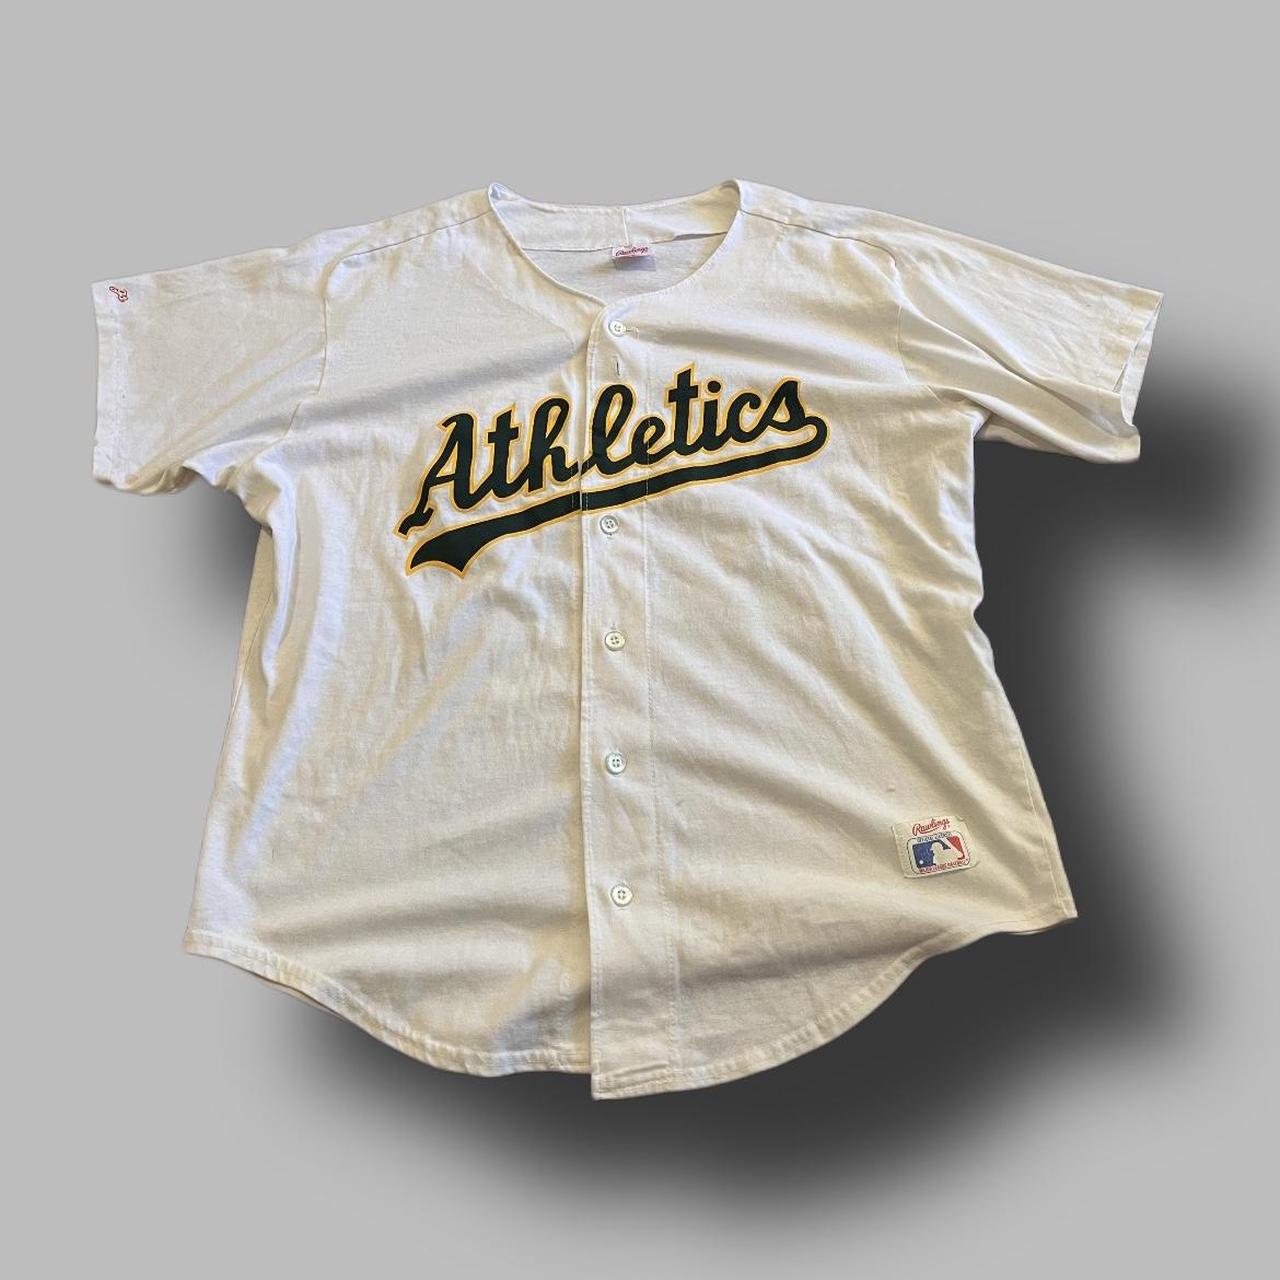 grey a's jersey